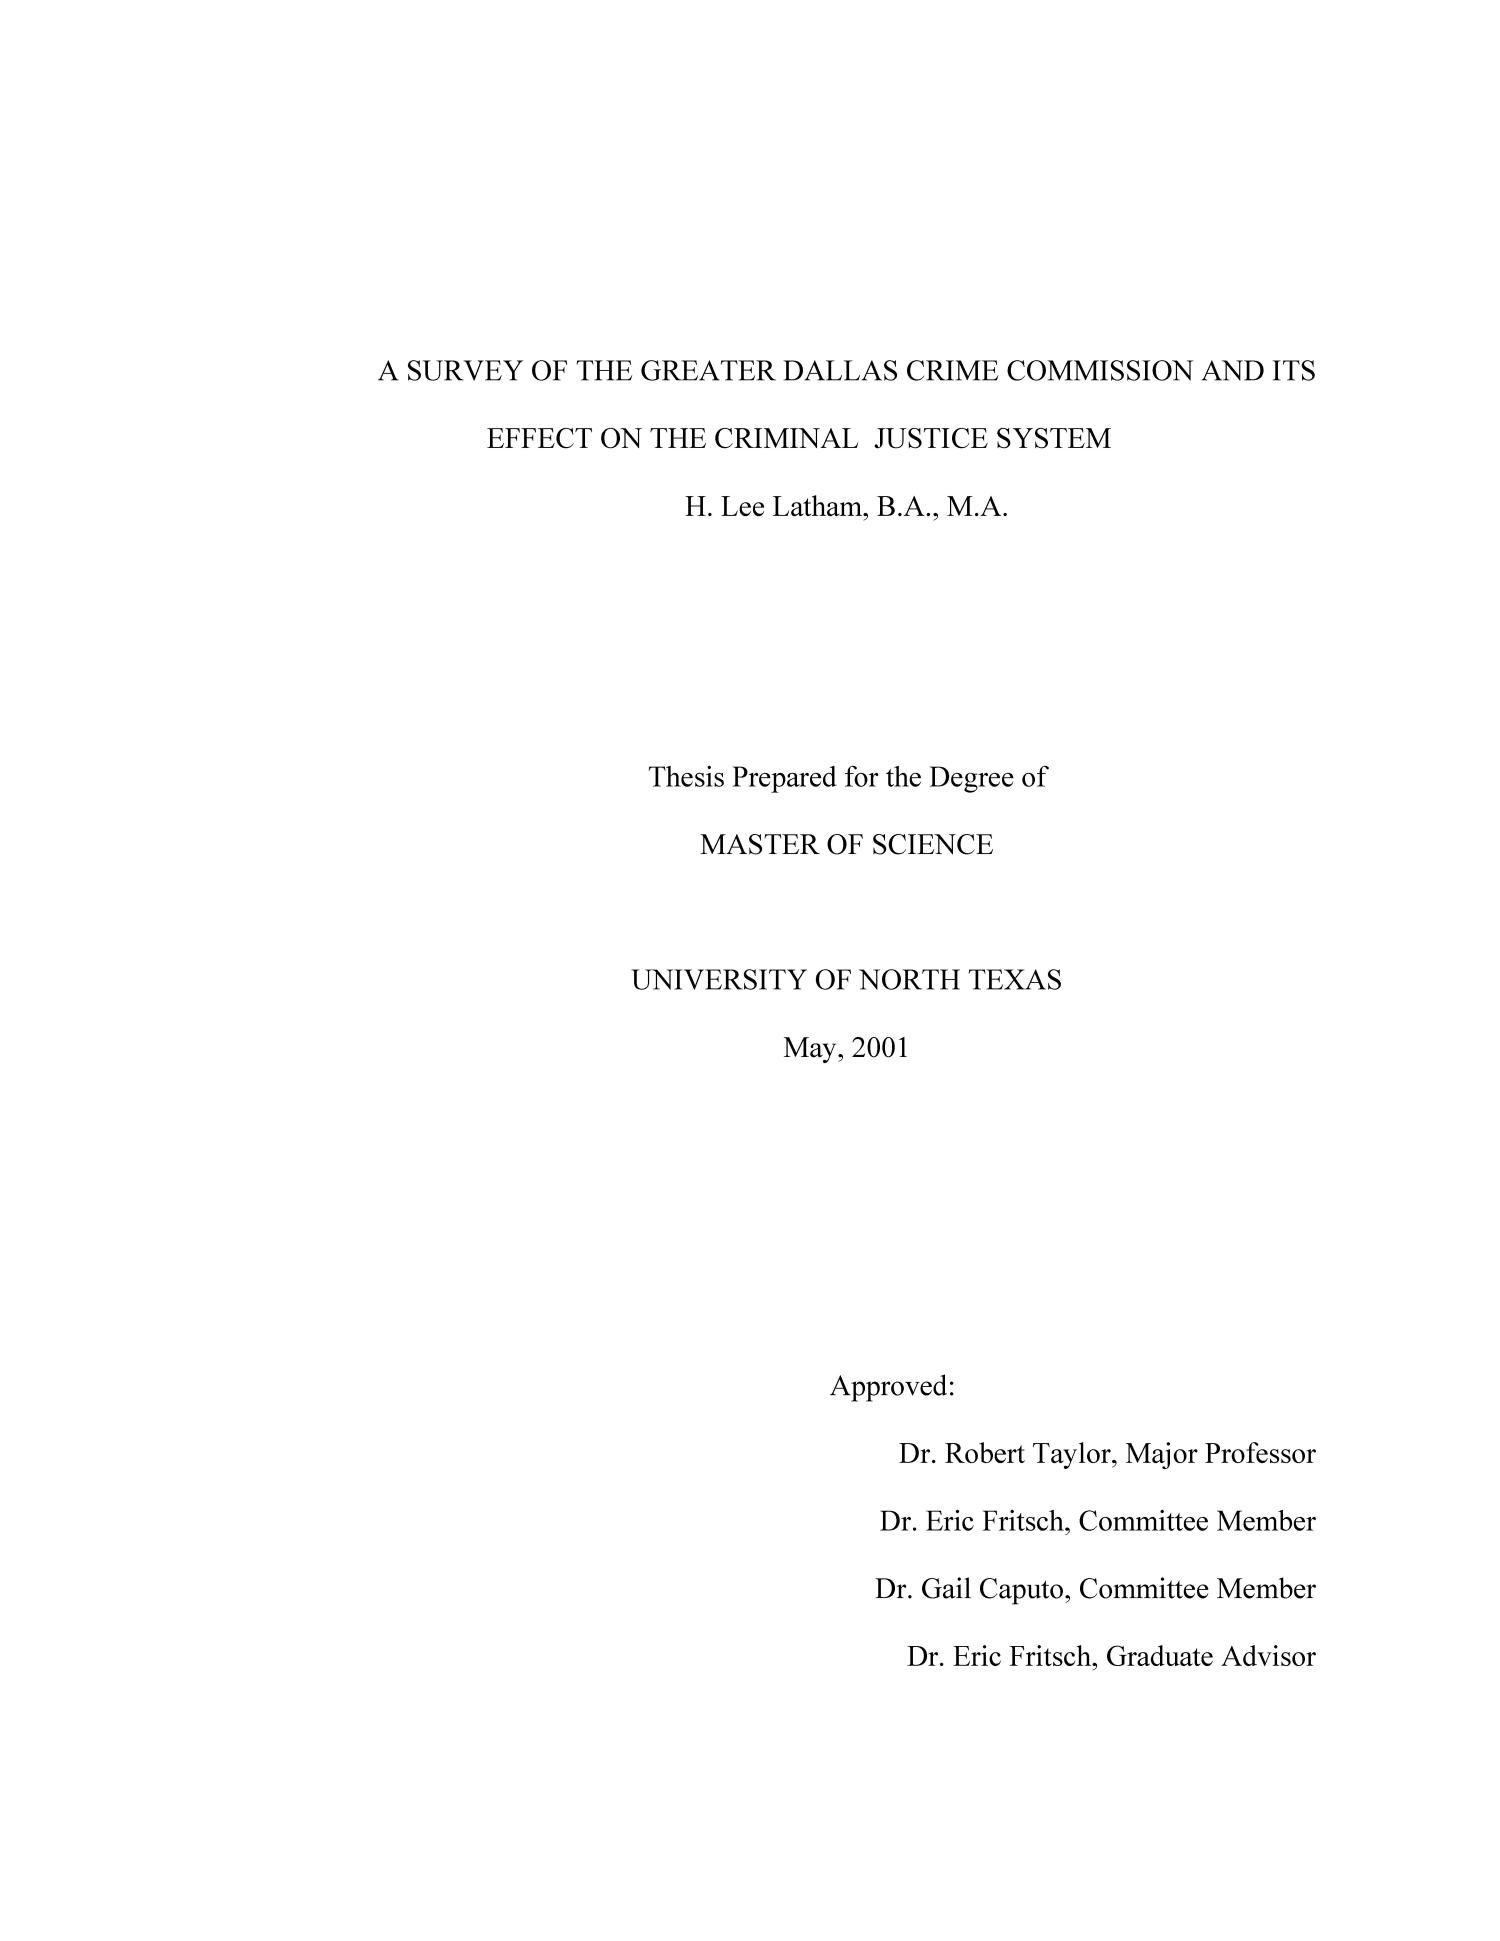 A survey of the Greater Dallas Crime Commission and its effect on the
                                                
                                                    Title Page
                                                